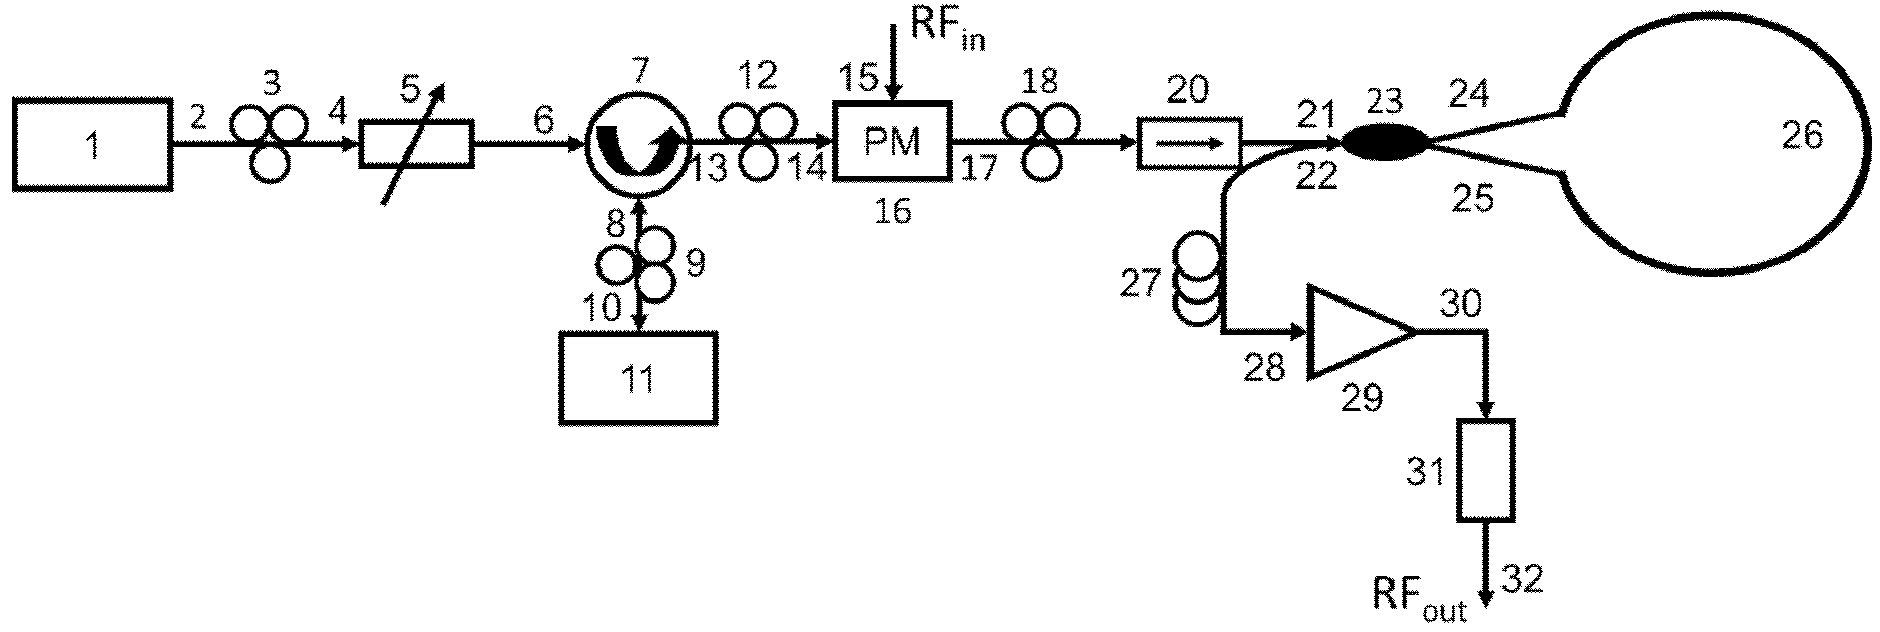 Tunable microwave photonic filter based on photoinjection semiconductor laser system